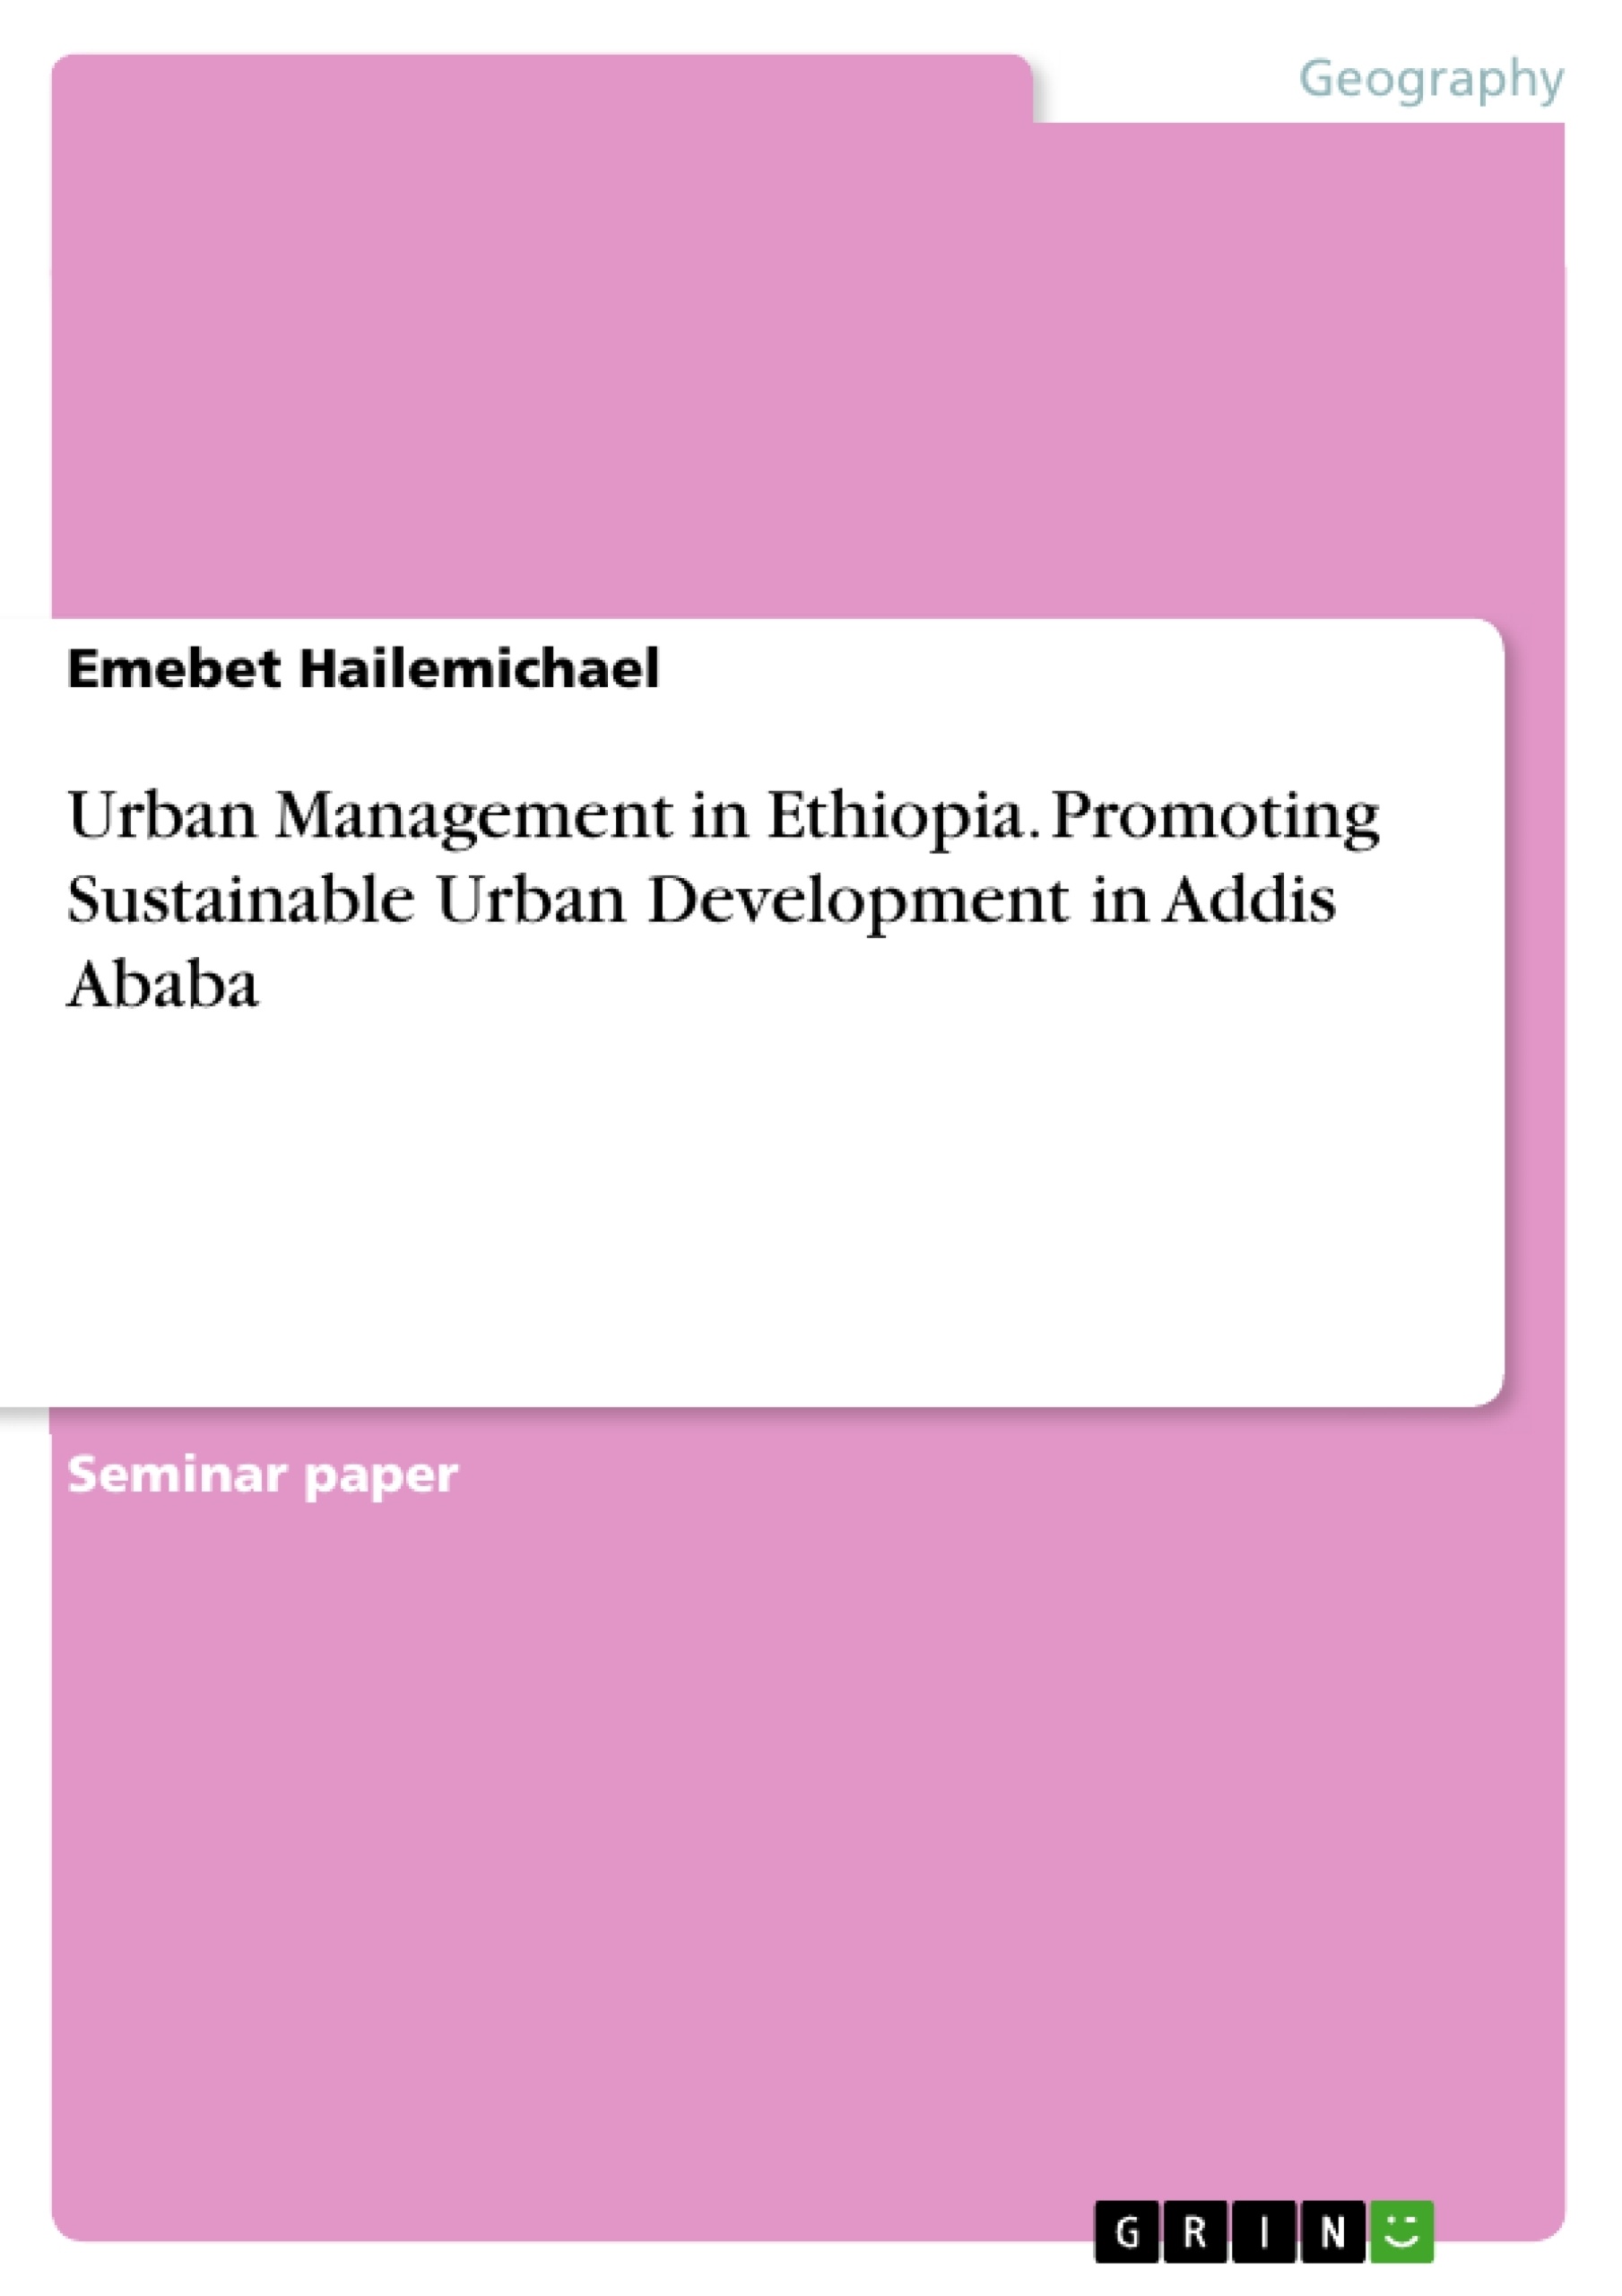 Title: Urban Management in Ethiopia. Promoting Sustainable Urban Development in Addis Ababa